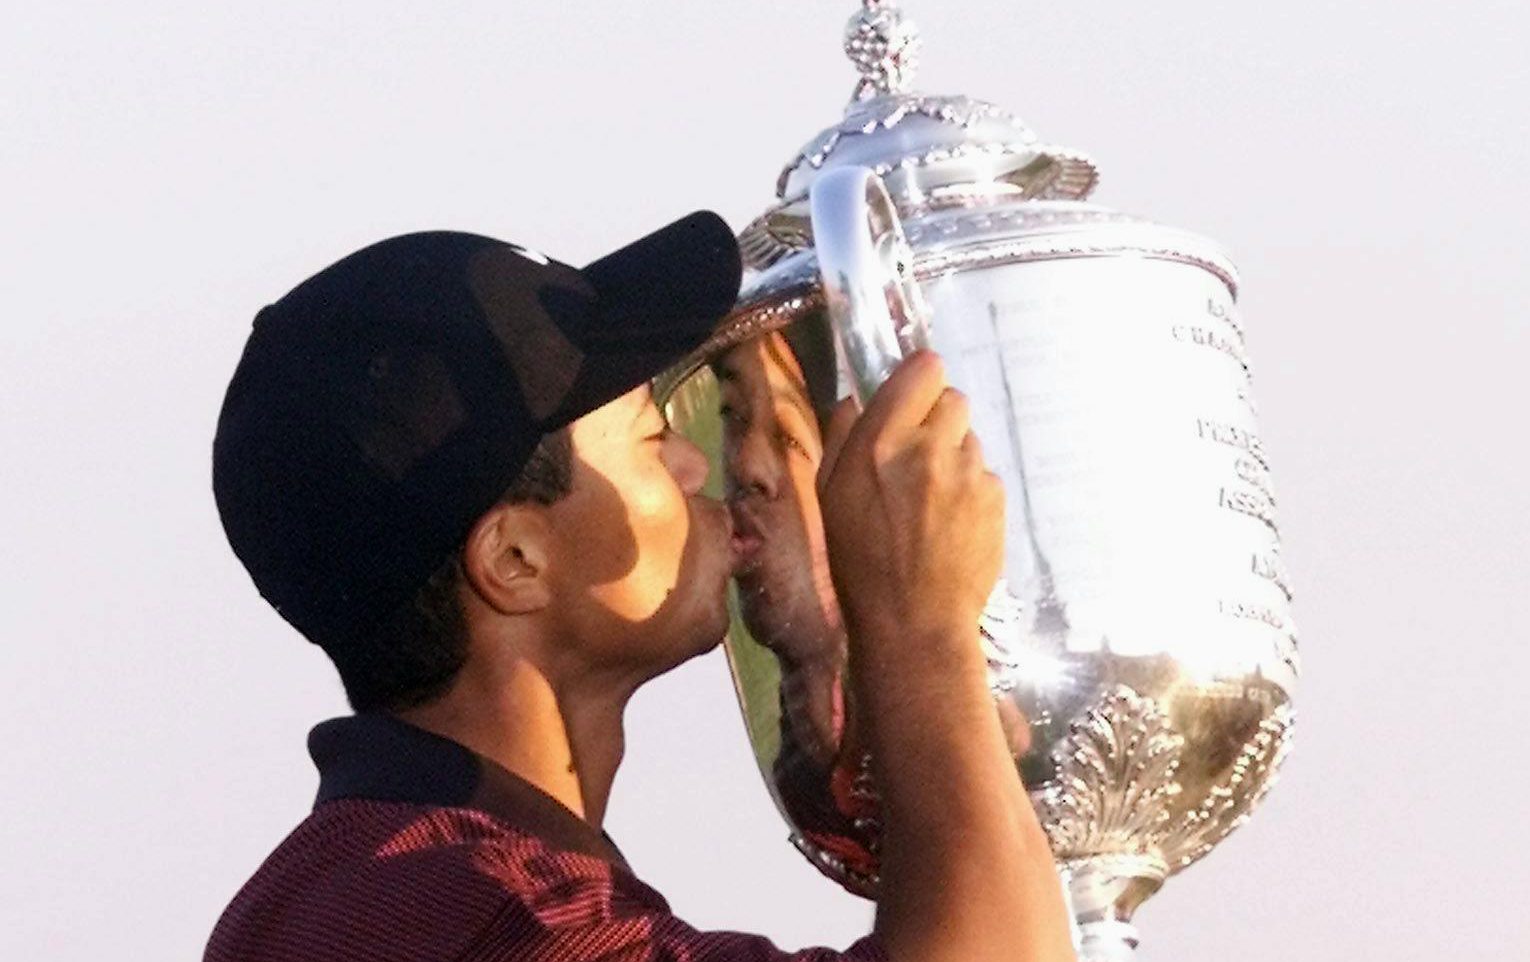 LOUISVILLE, : Golfer Tiger Woods of the US kisses the Wanamaker trophy 20 August, 2000 after winning the 82nd PGA Championship at Valhalla Golf Club in Louisville, KY. Woods won a three hole playoff with Bob May to become the first player since 1953 to win three majors in one season. (ELECTRONIC IMAGE) AFP PHOTO/Matt CAMPBELL (Photo credit should read MATT CAMPBELL/AFP/Getty Images)